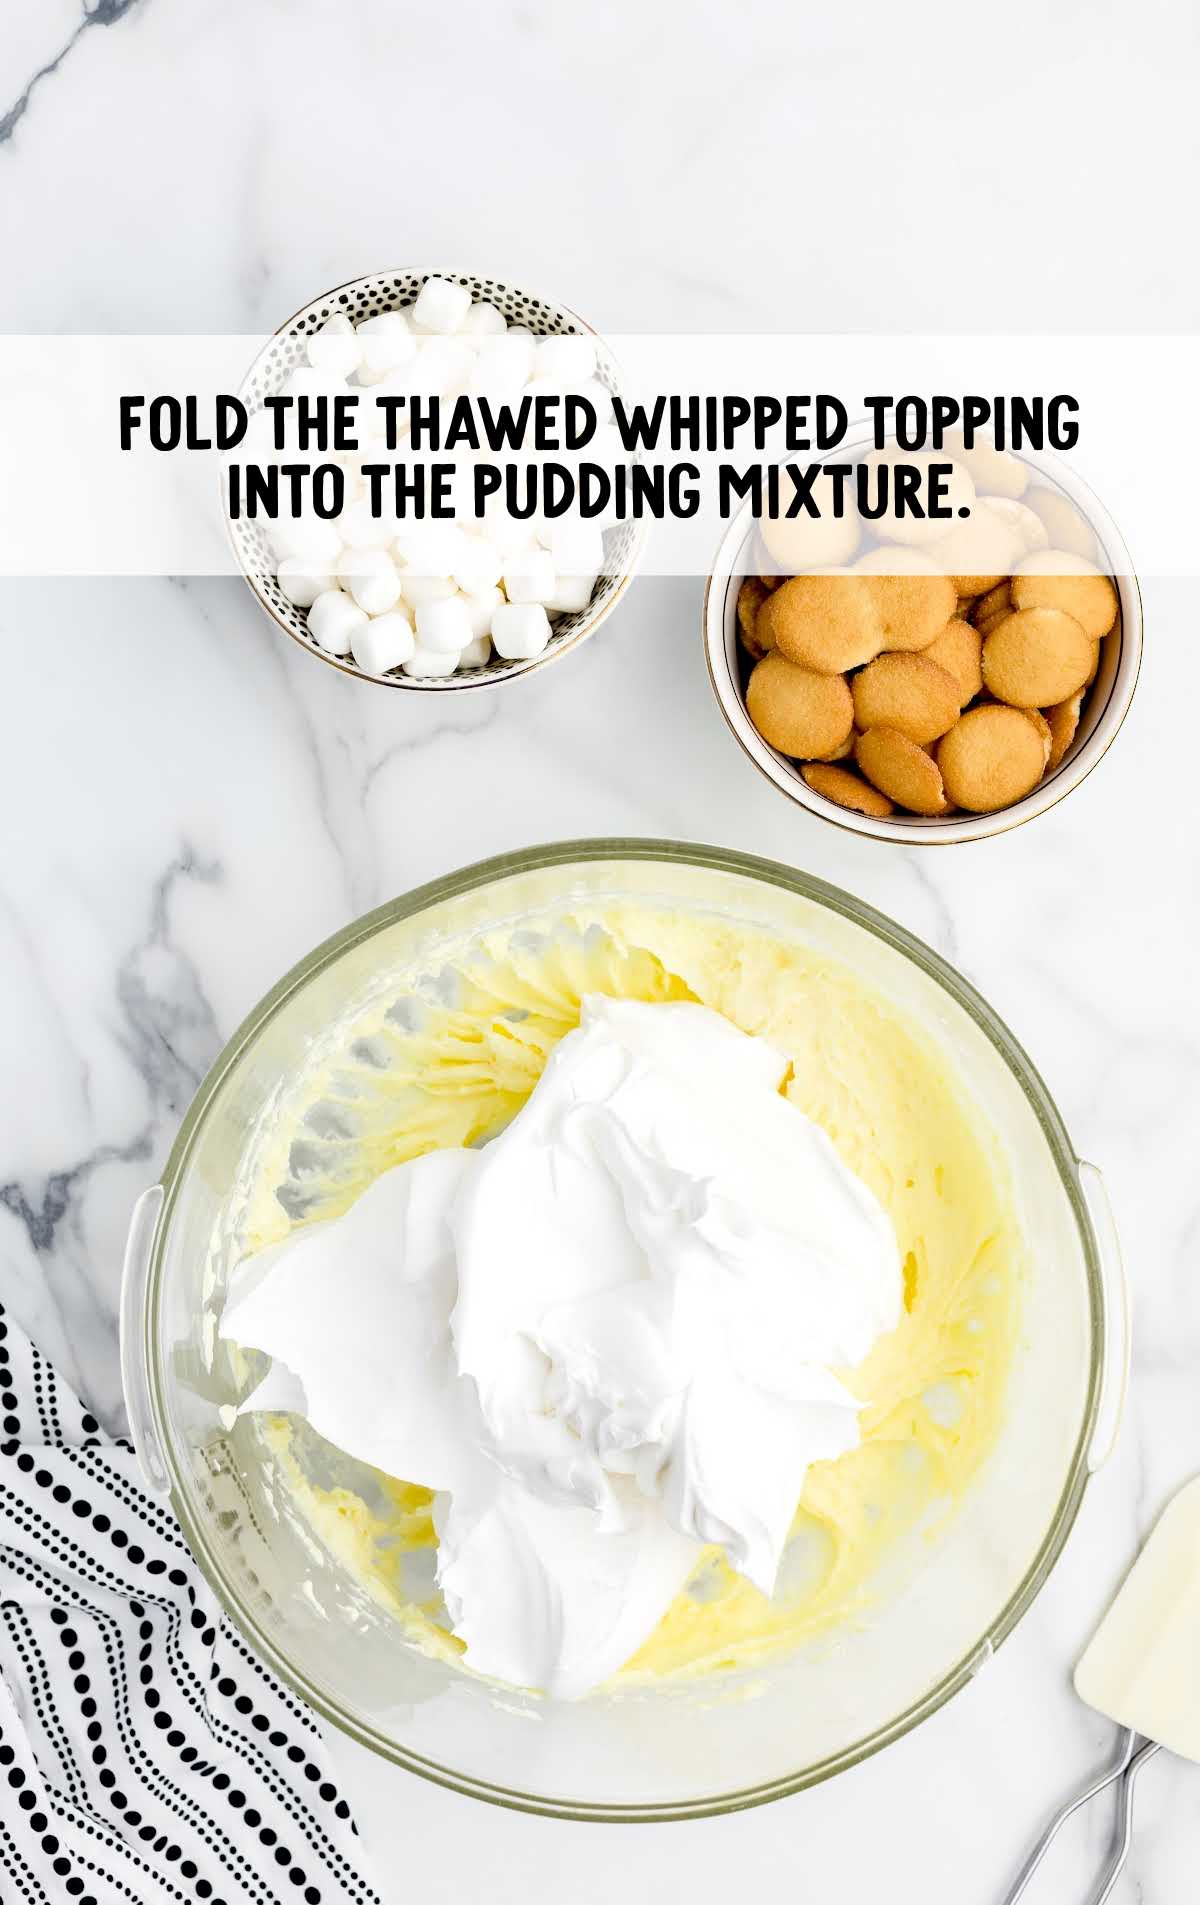 whipped topping folded into the pudding mixture